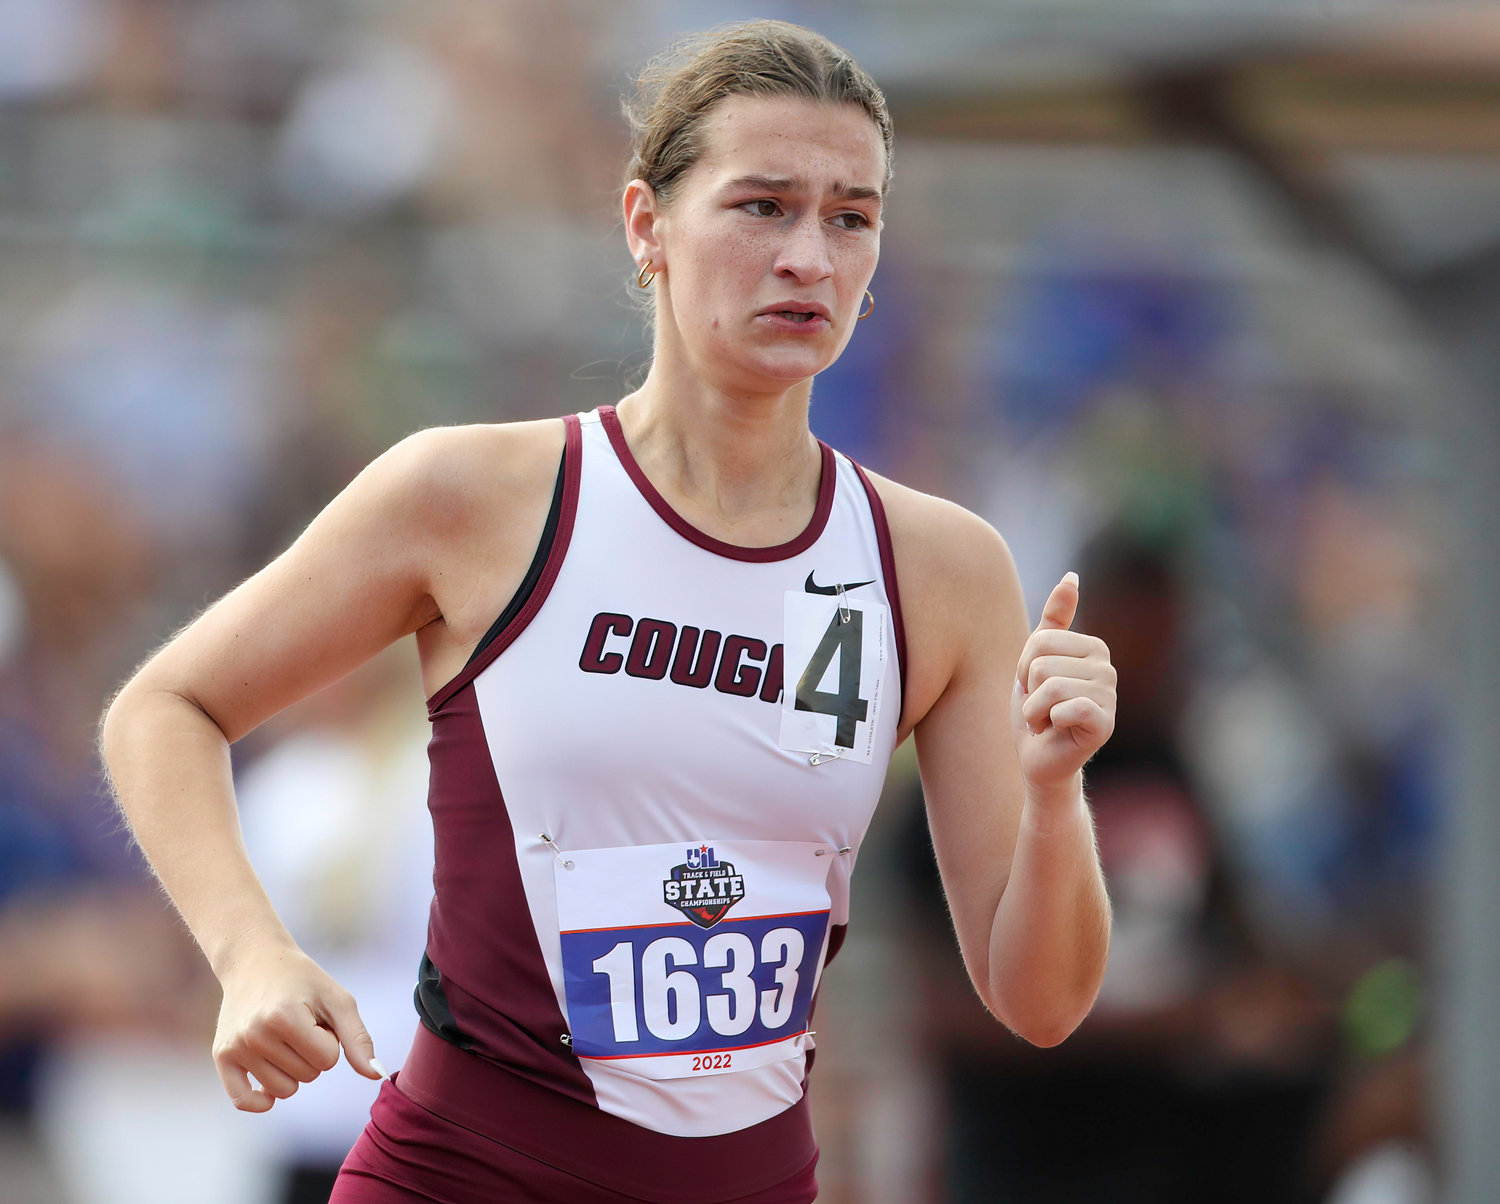 Alison Mueller of Cinco Ranch High School runs in the Class 6A girls 3200-meter run at the UIL State Track and Field Meet on May 14, 2022 in Austin, Texas.